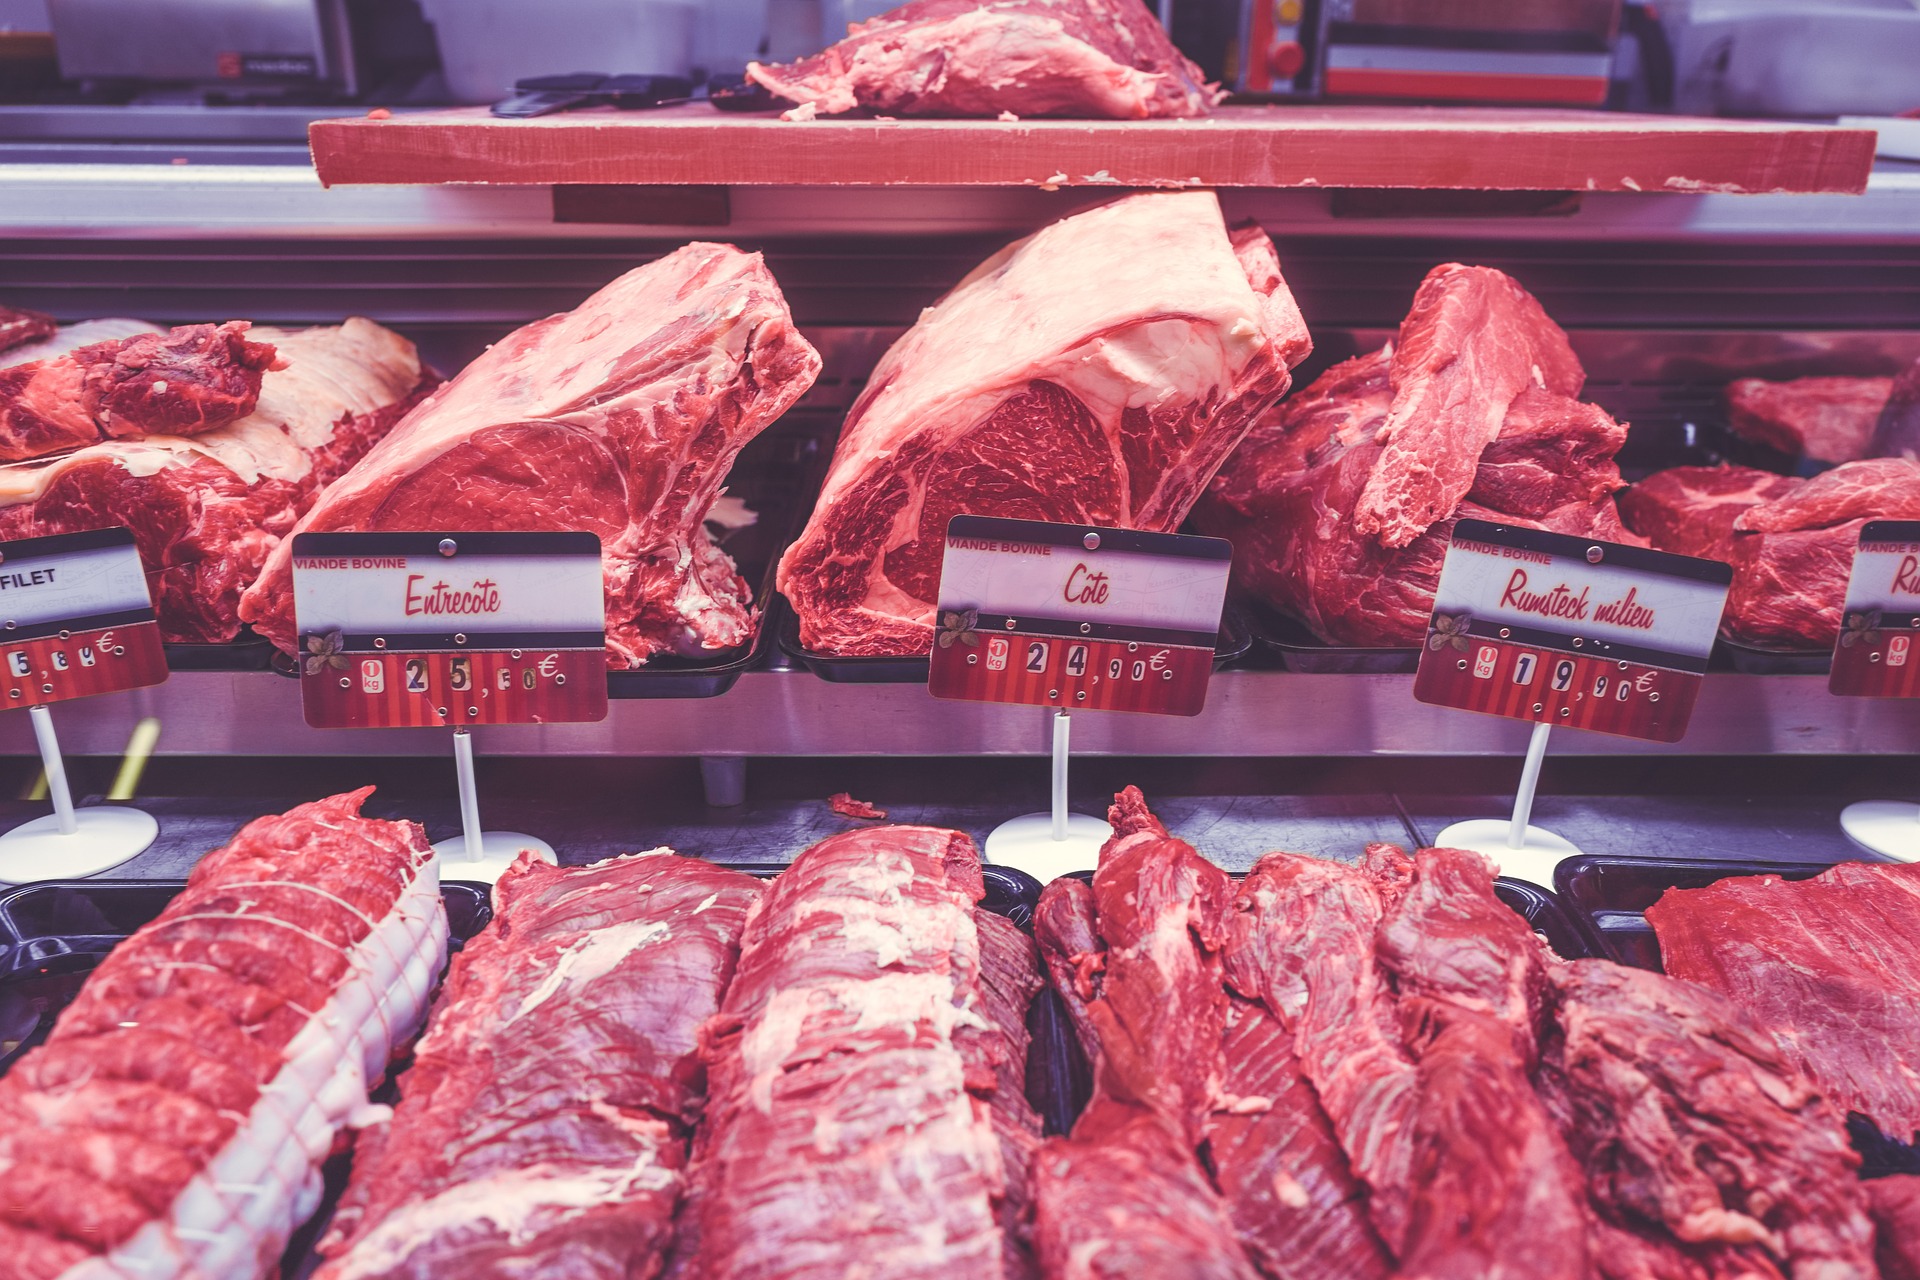 Low-carb diets lose their benefits when you go hard on animal products